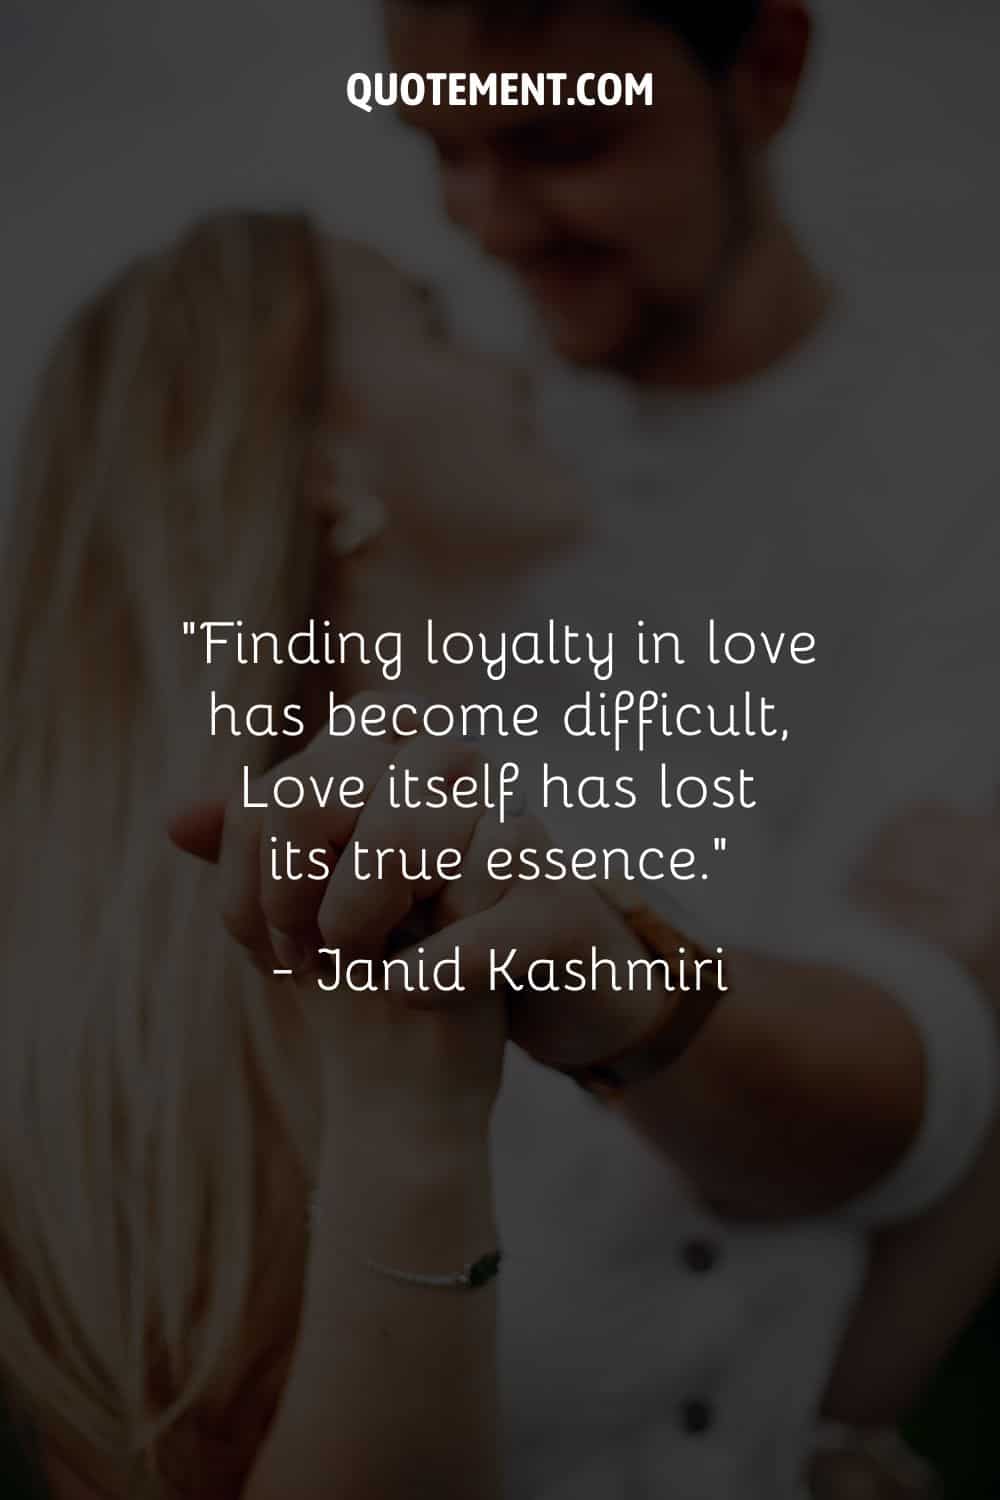 “Finding loyalty in love has become difficult, Love itself has lost its true essence.” ― Janid Kashmiri